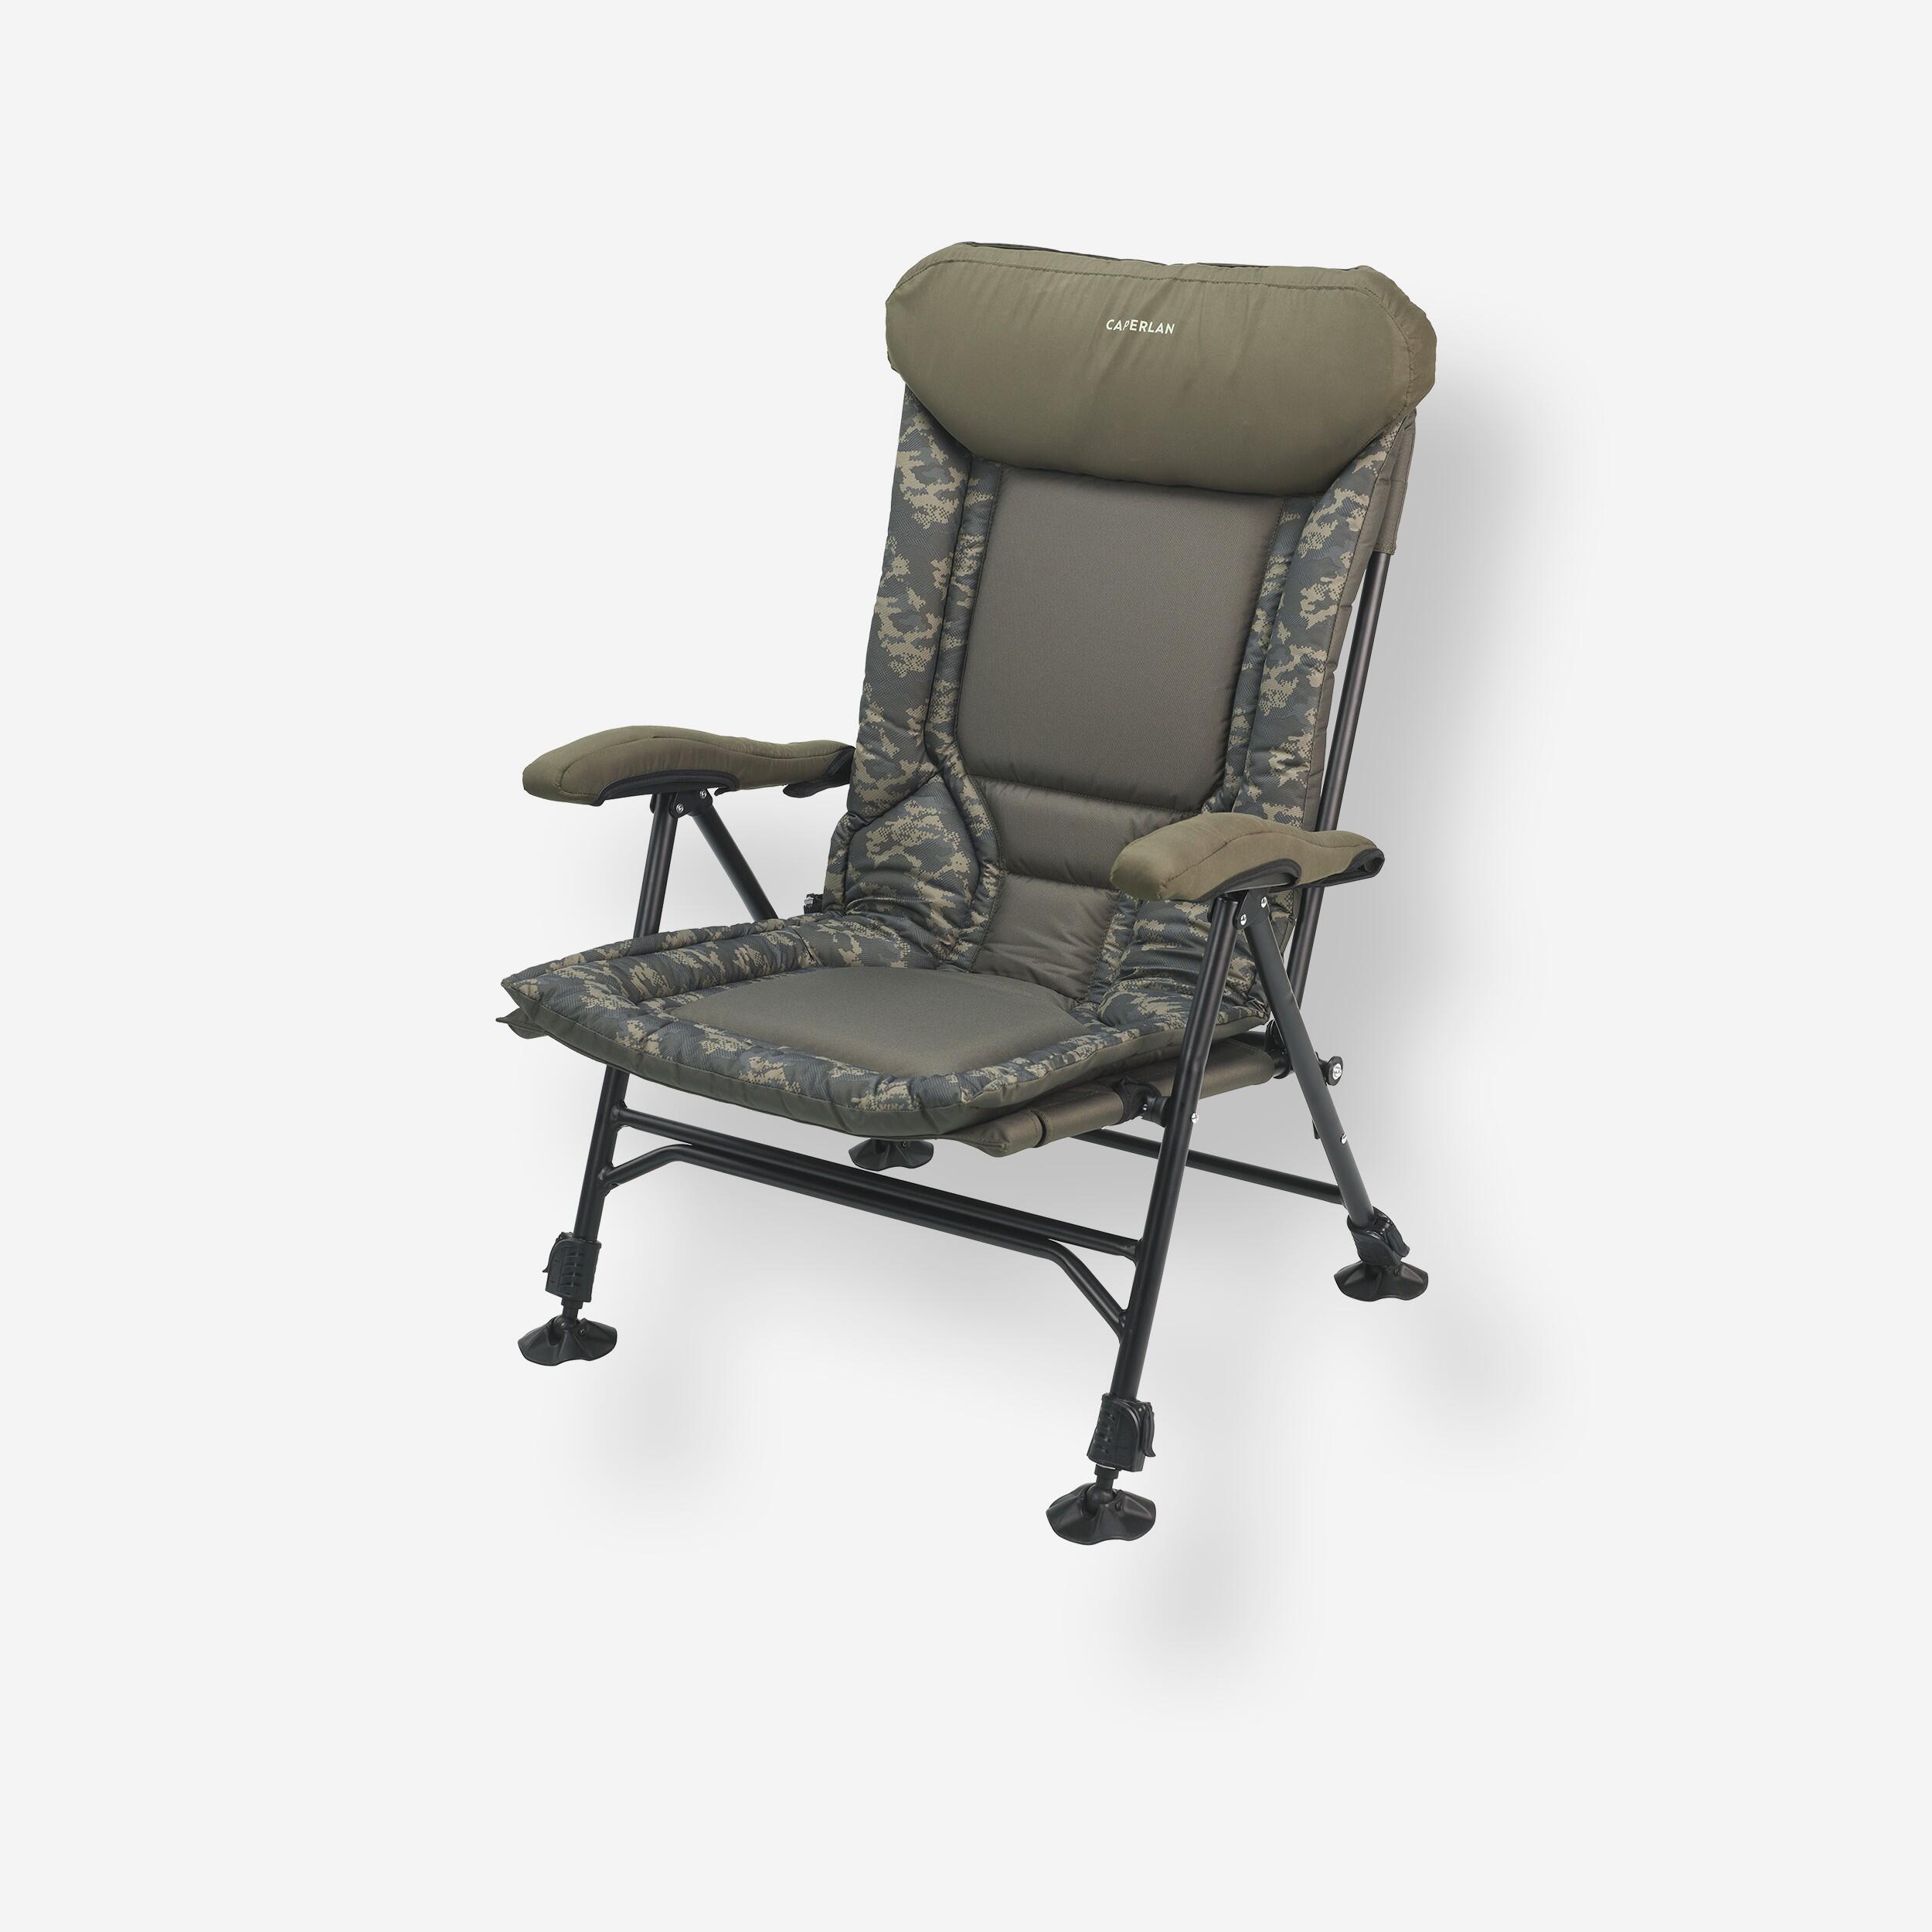 Fishing Chairs, Relax in Comfort